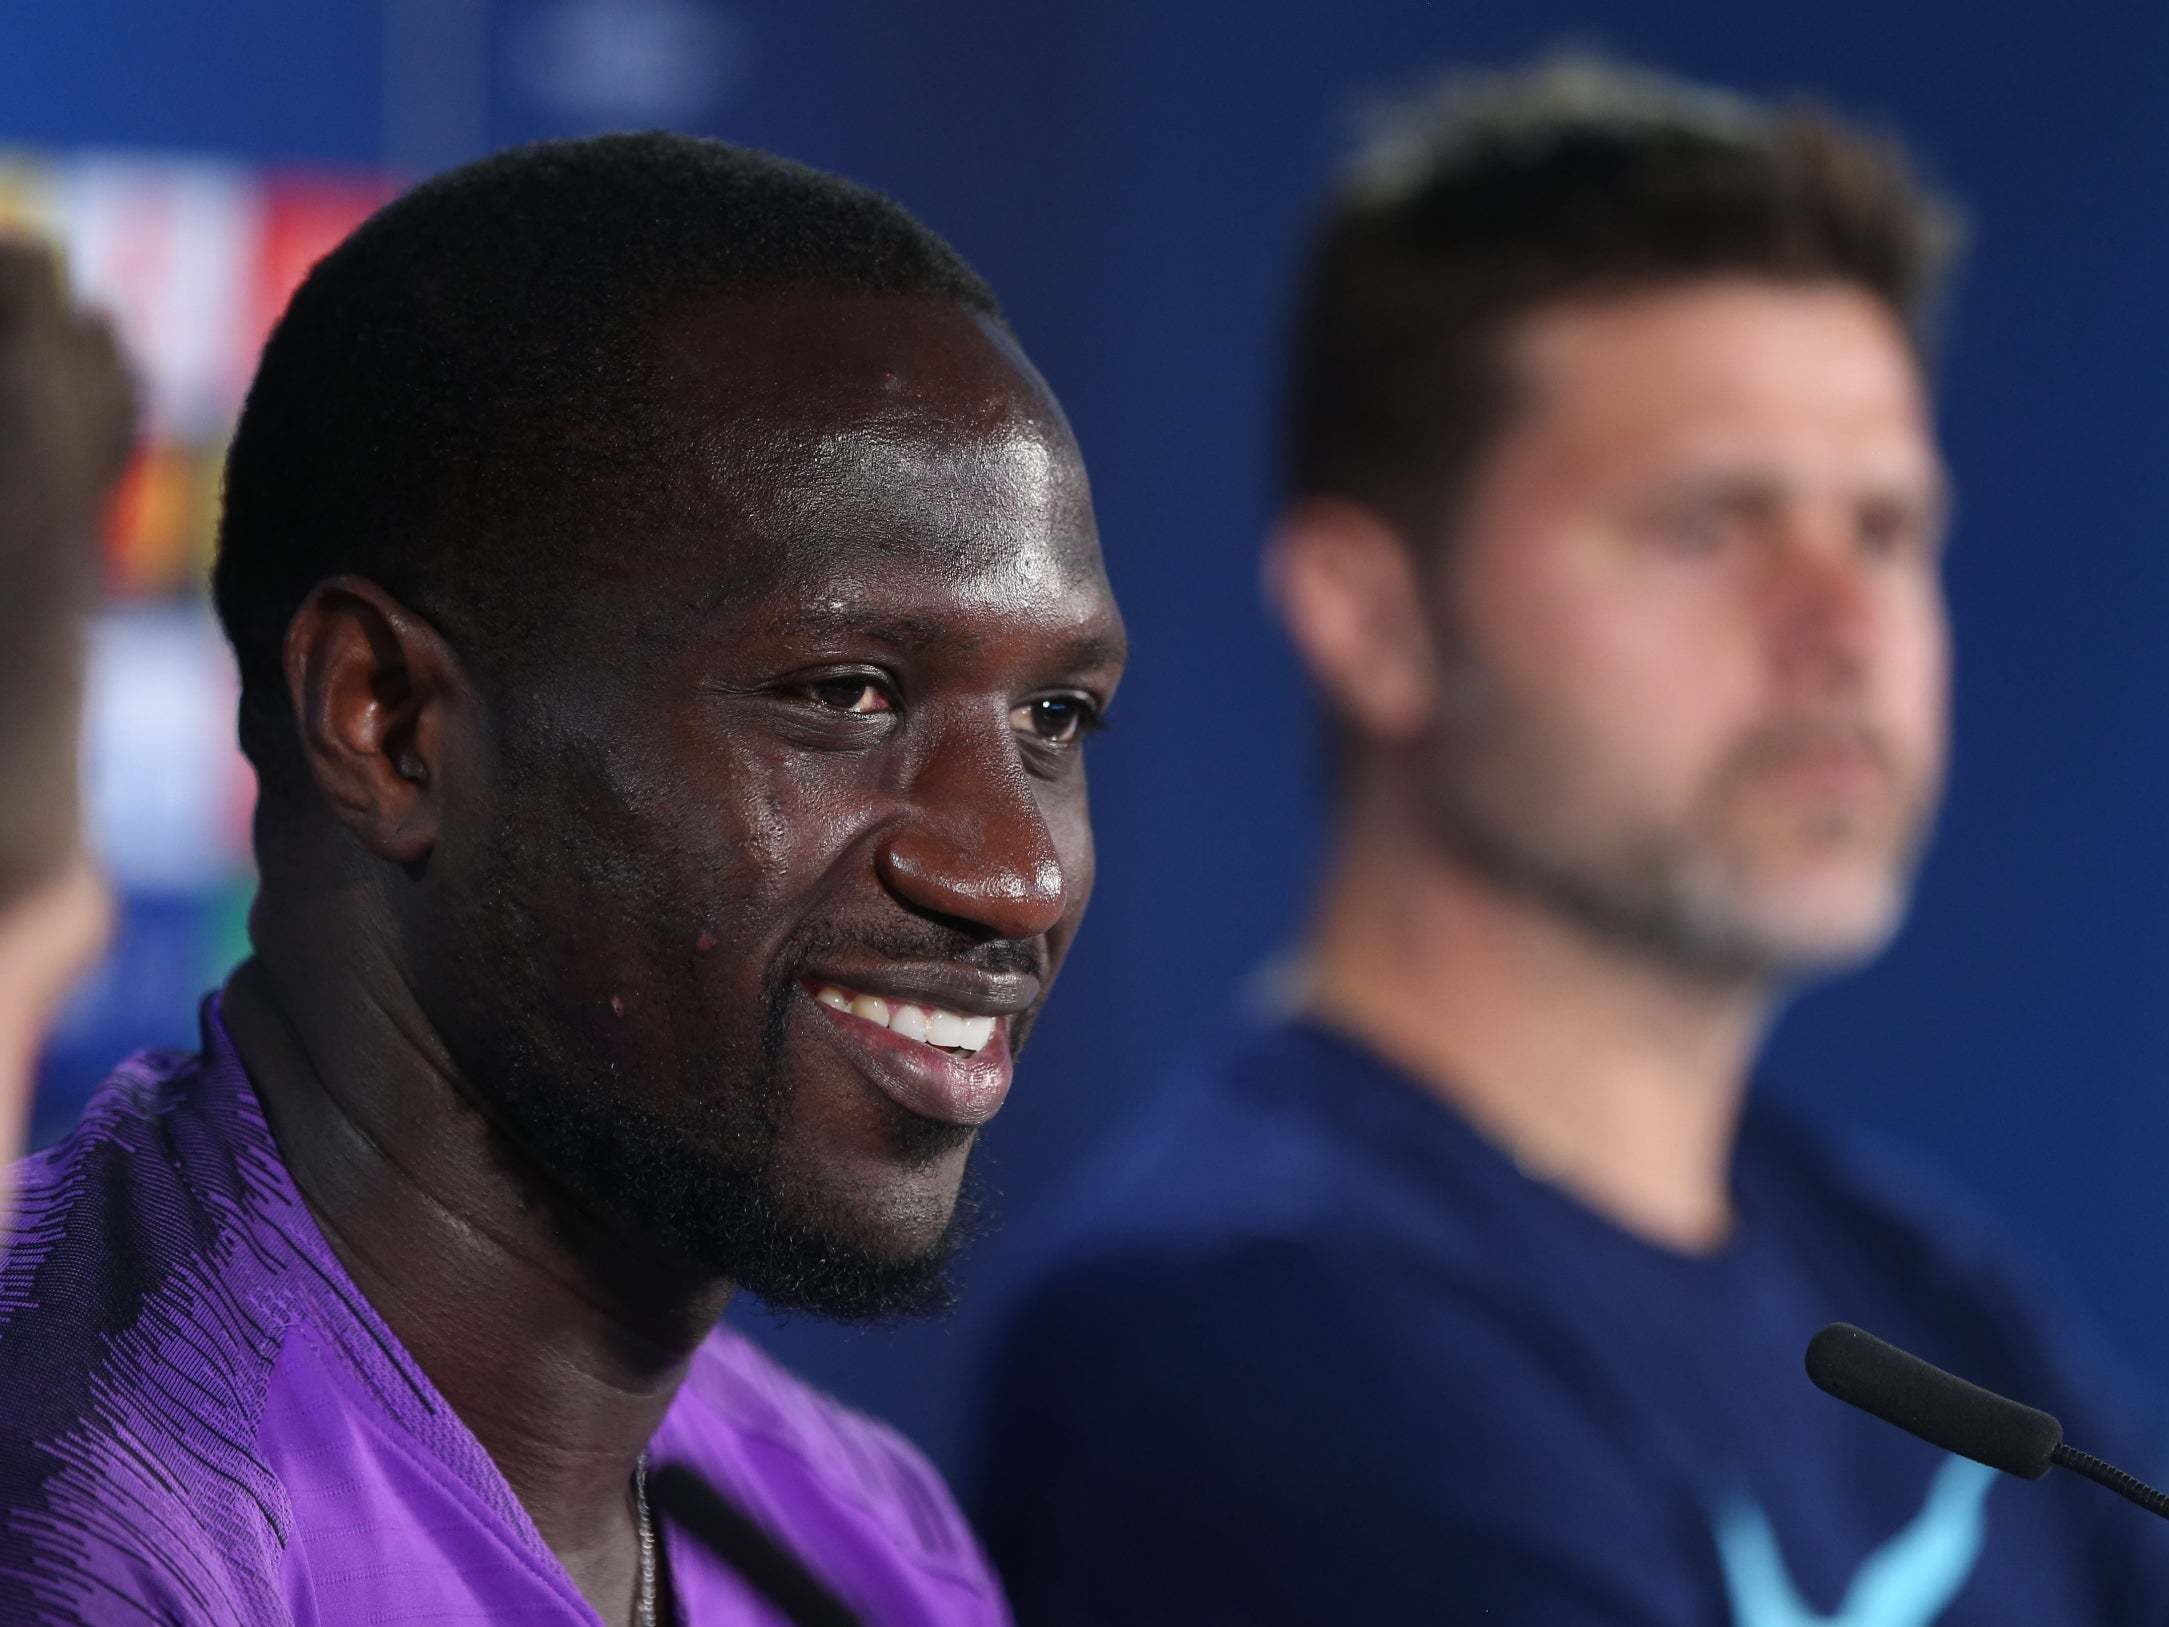 Moussa Sissoko has become a key player for Spurs this year